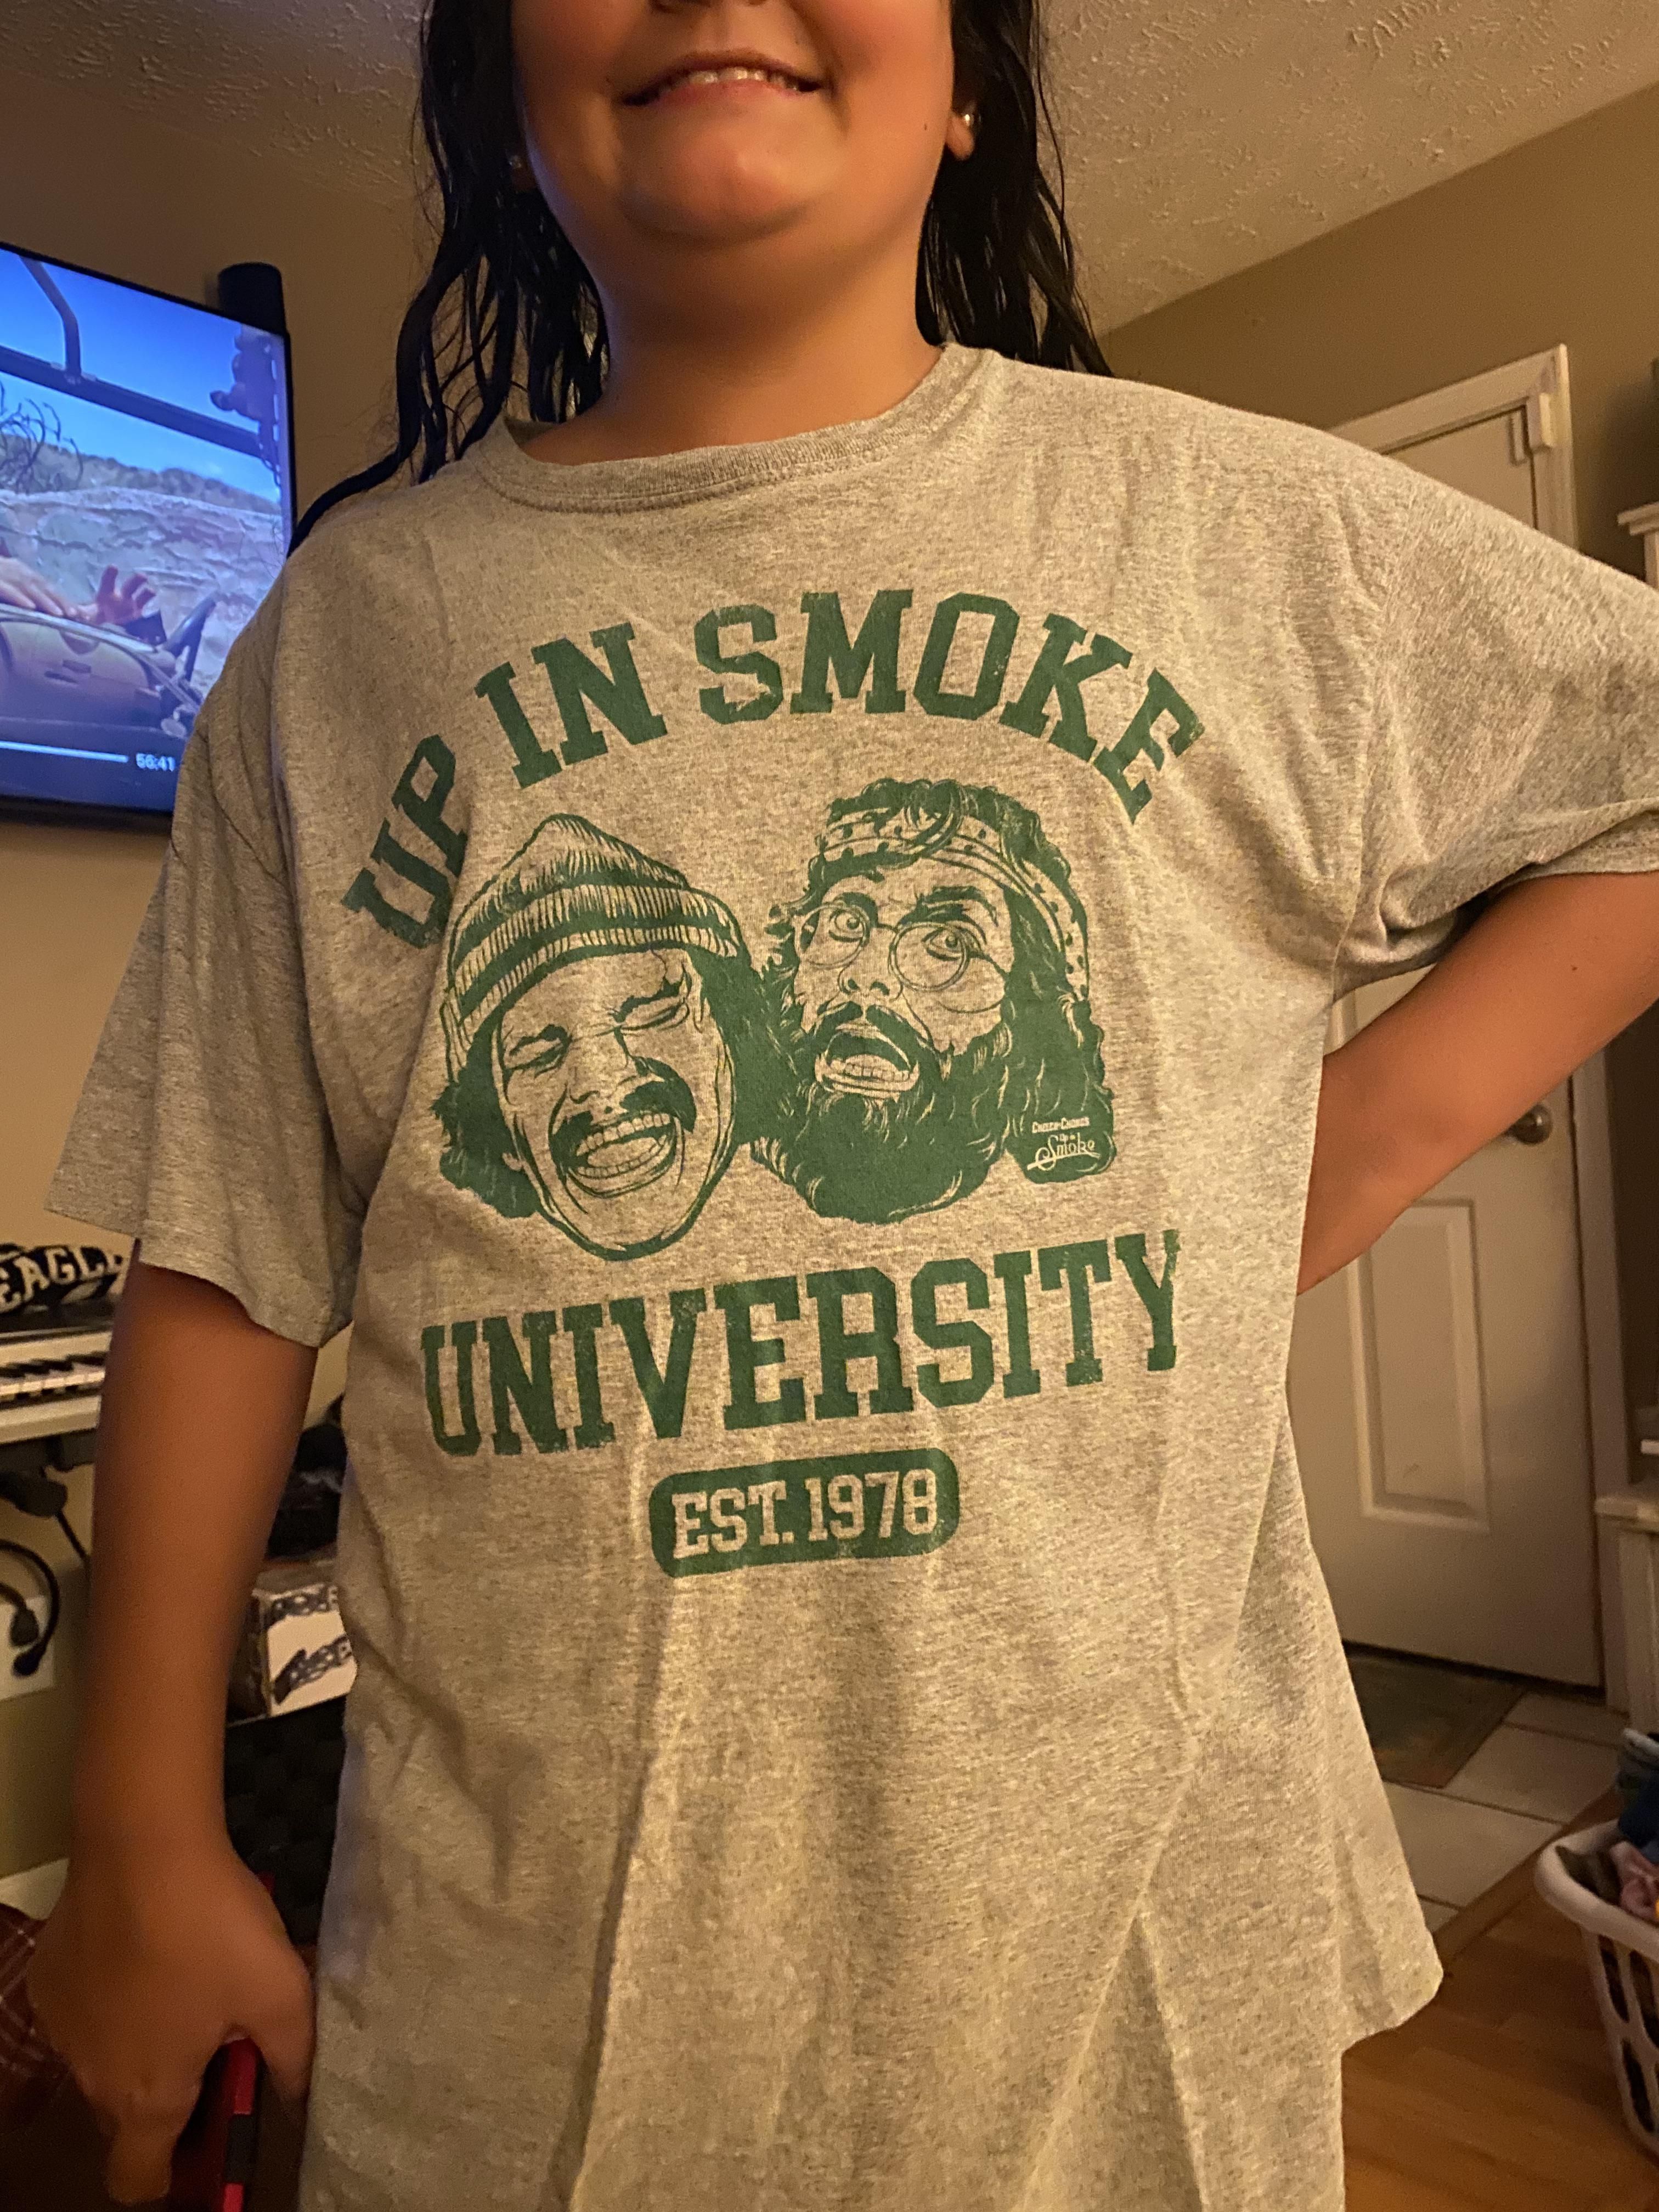 My 11 year old came downstairs and said she found a duck dynasty shirt in mom’s drawer to wear.